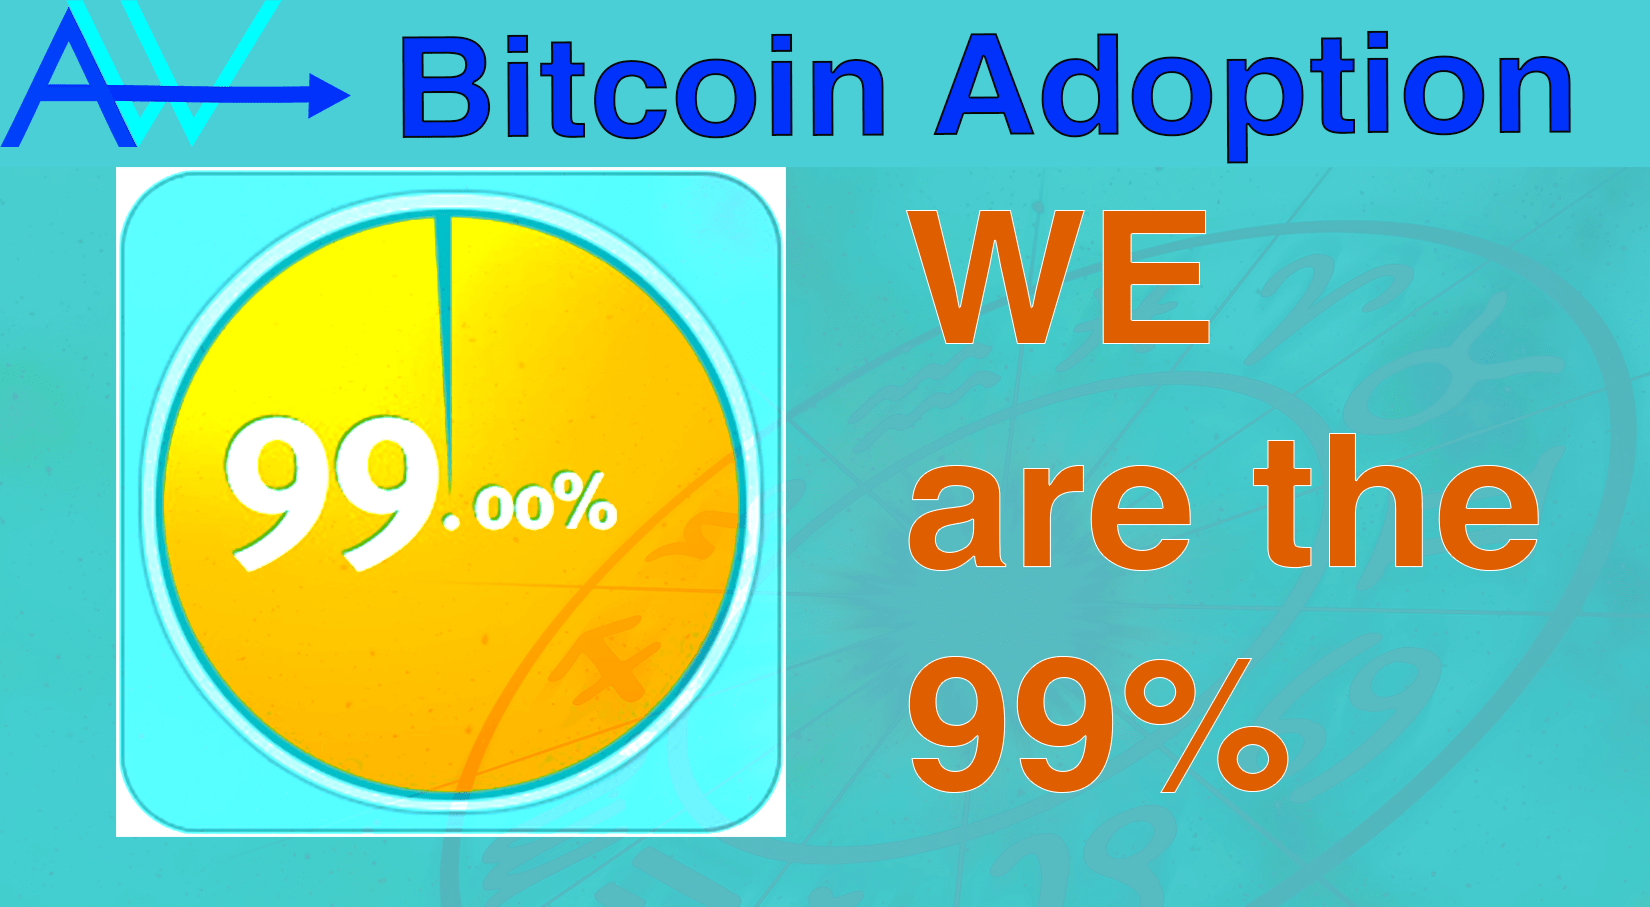 Wr are the 99% Bitcoin Adoption